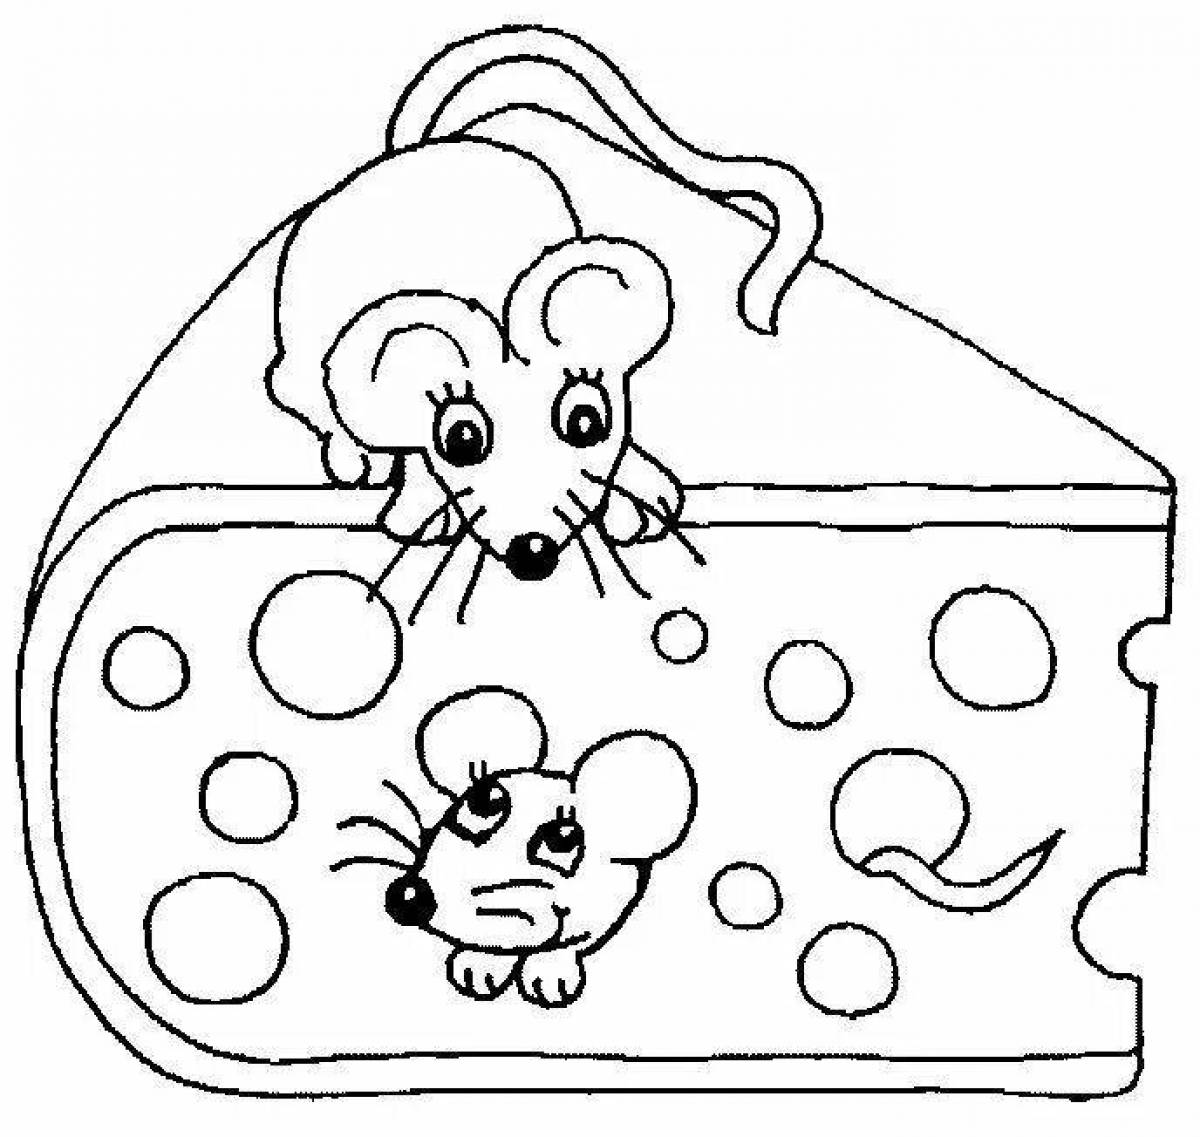 Coloring page funny mouse with cheese